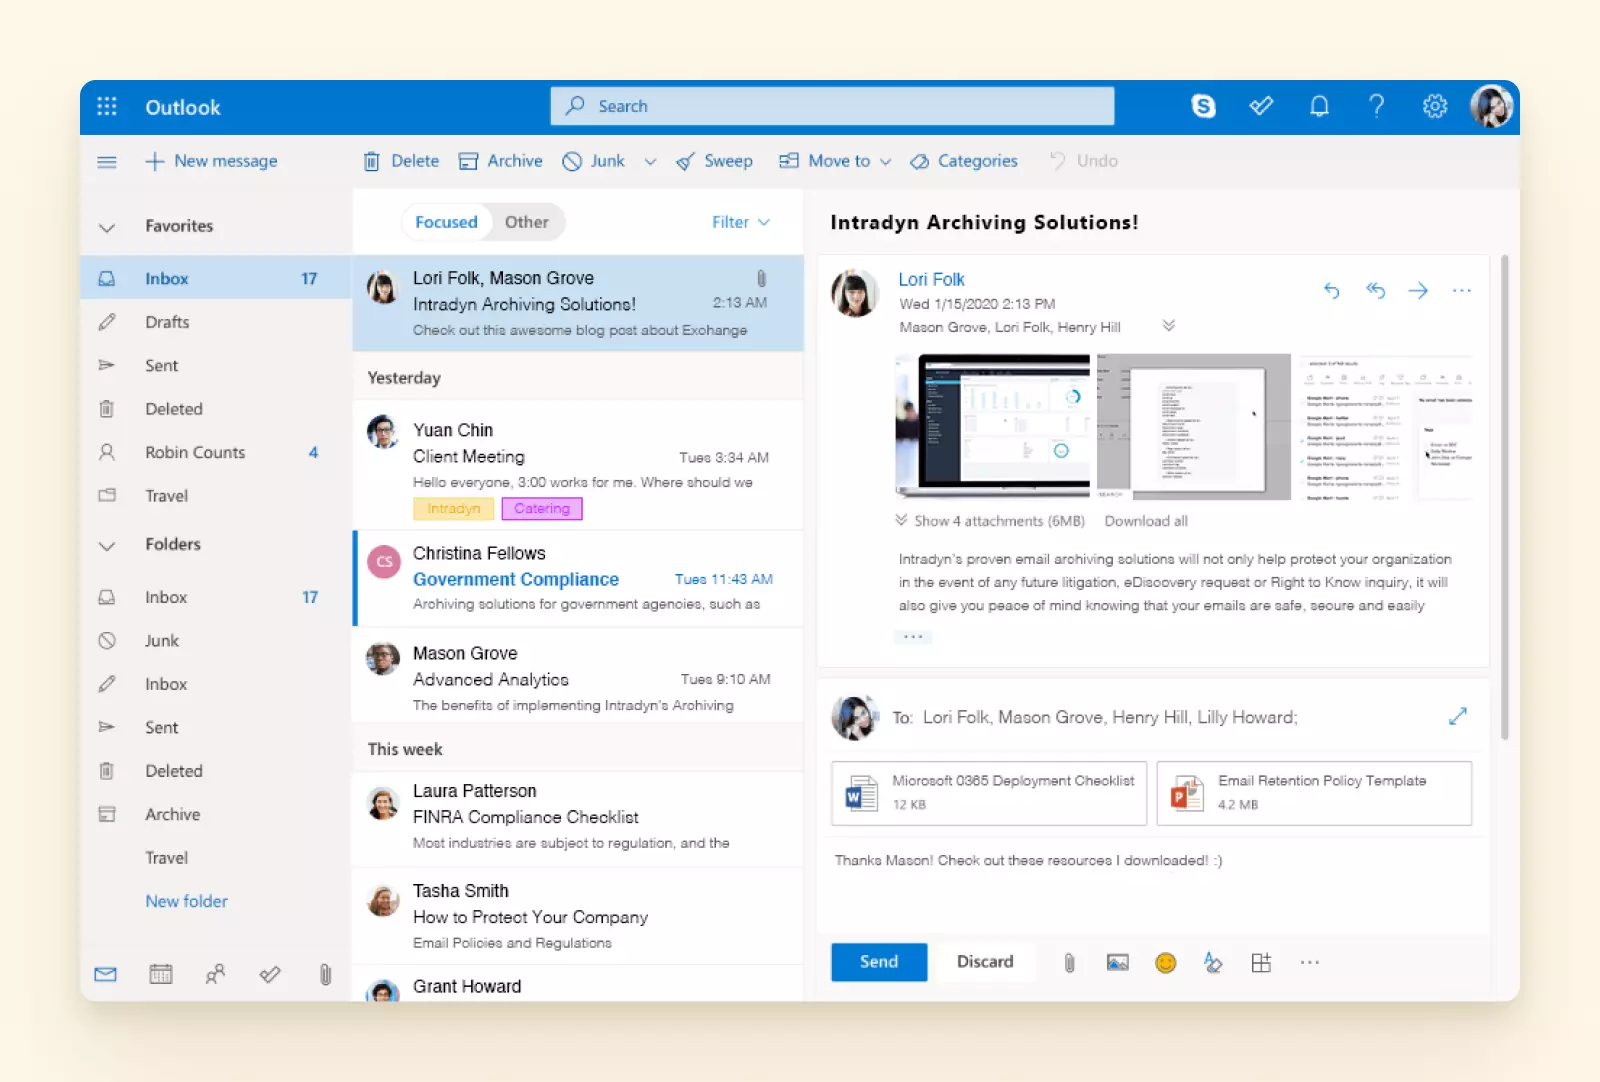 Outlook email client interface three-pane view